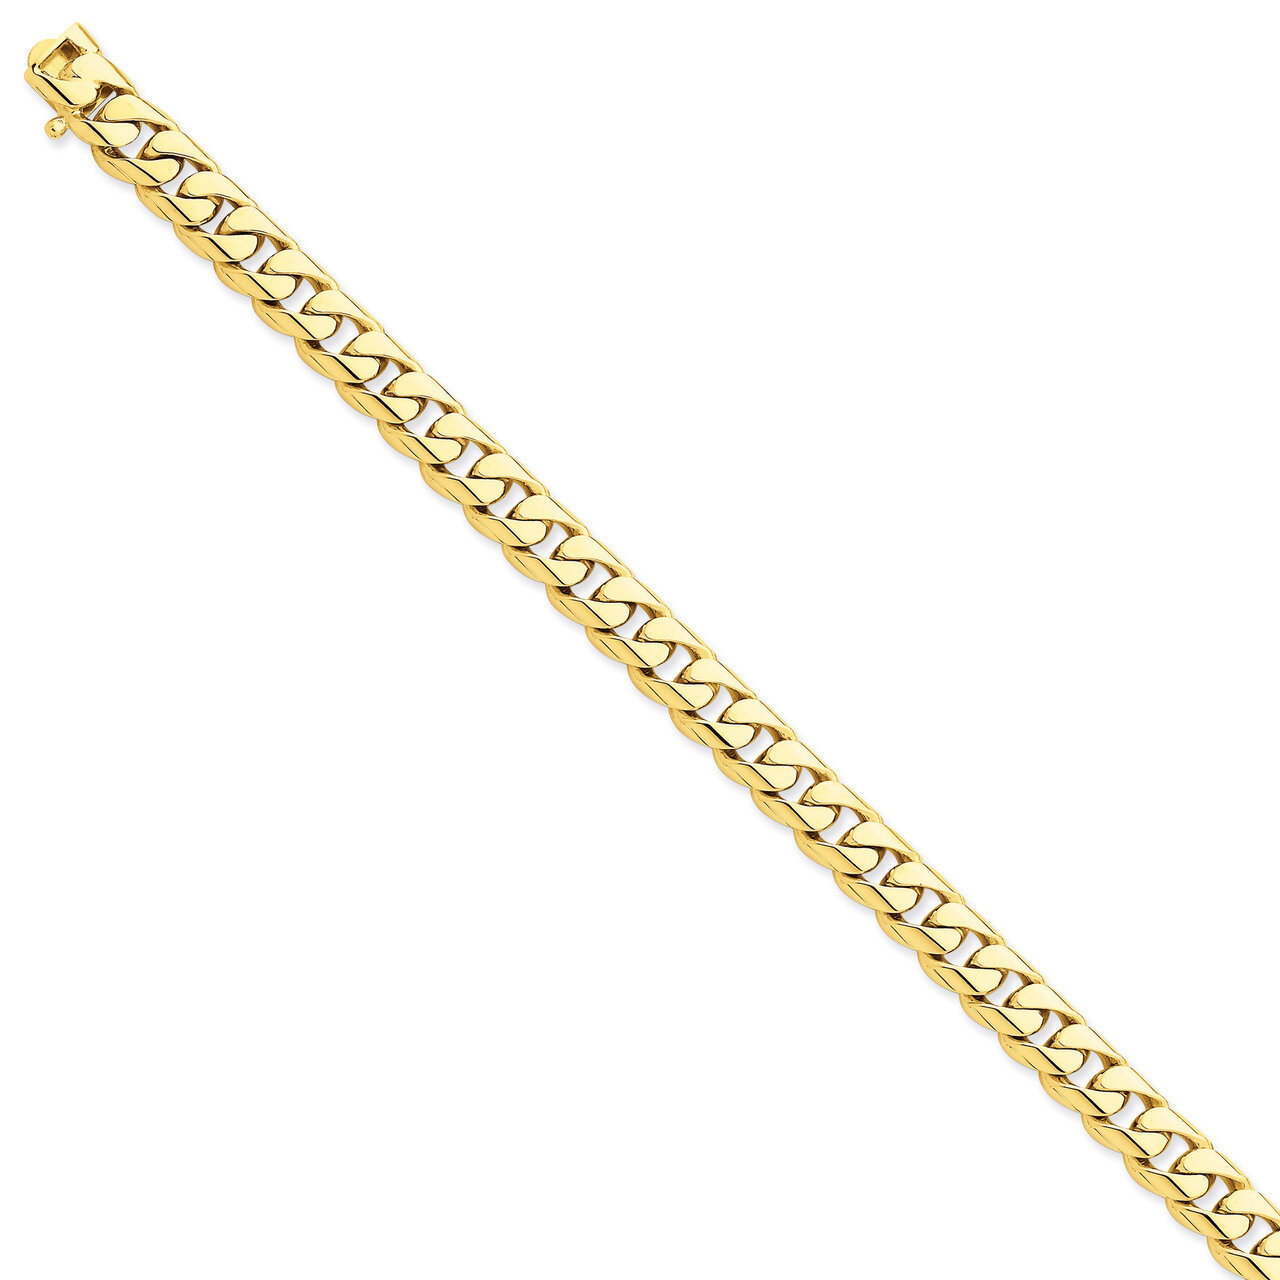 8.75mm Hand-polished Rounded Curb Chain 8 Inch 14k Gold LK125-8